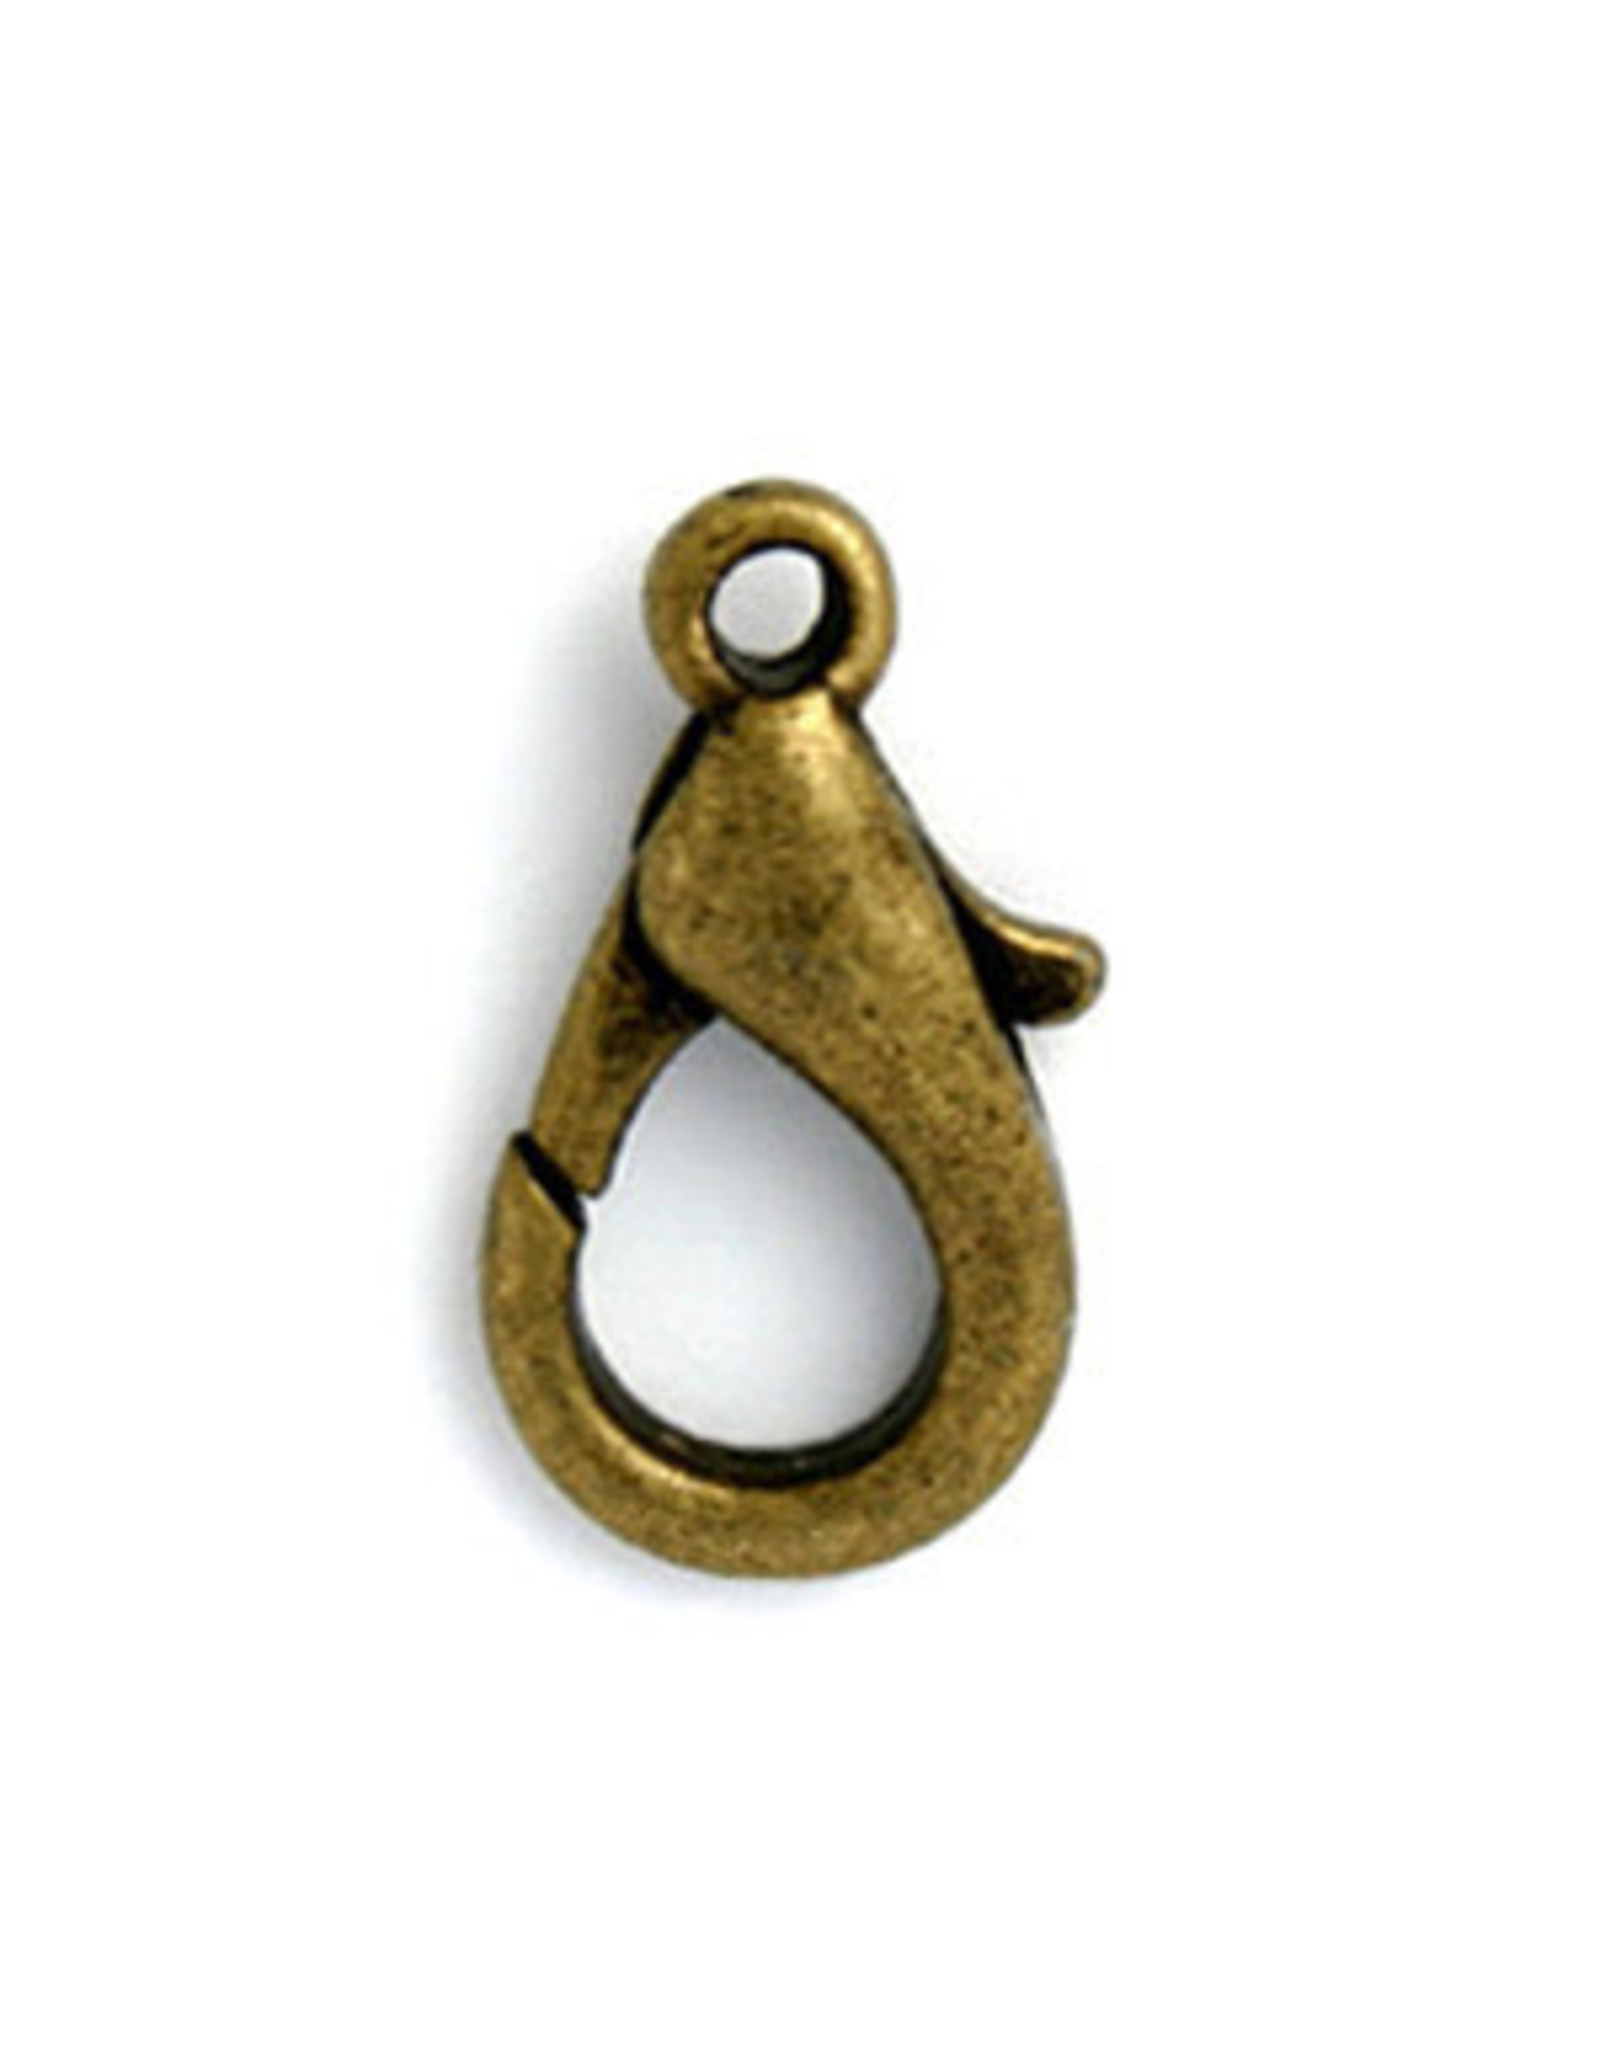 Lobster Clasp 18mm Antique Brass x25 NF